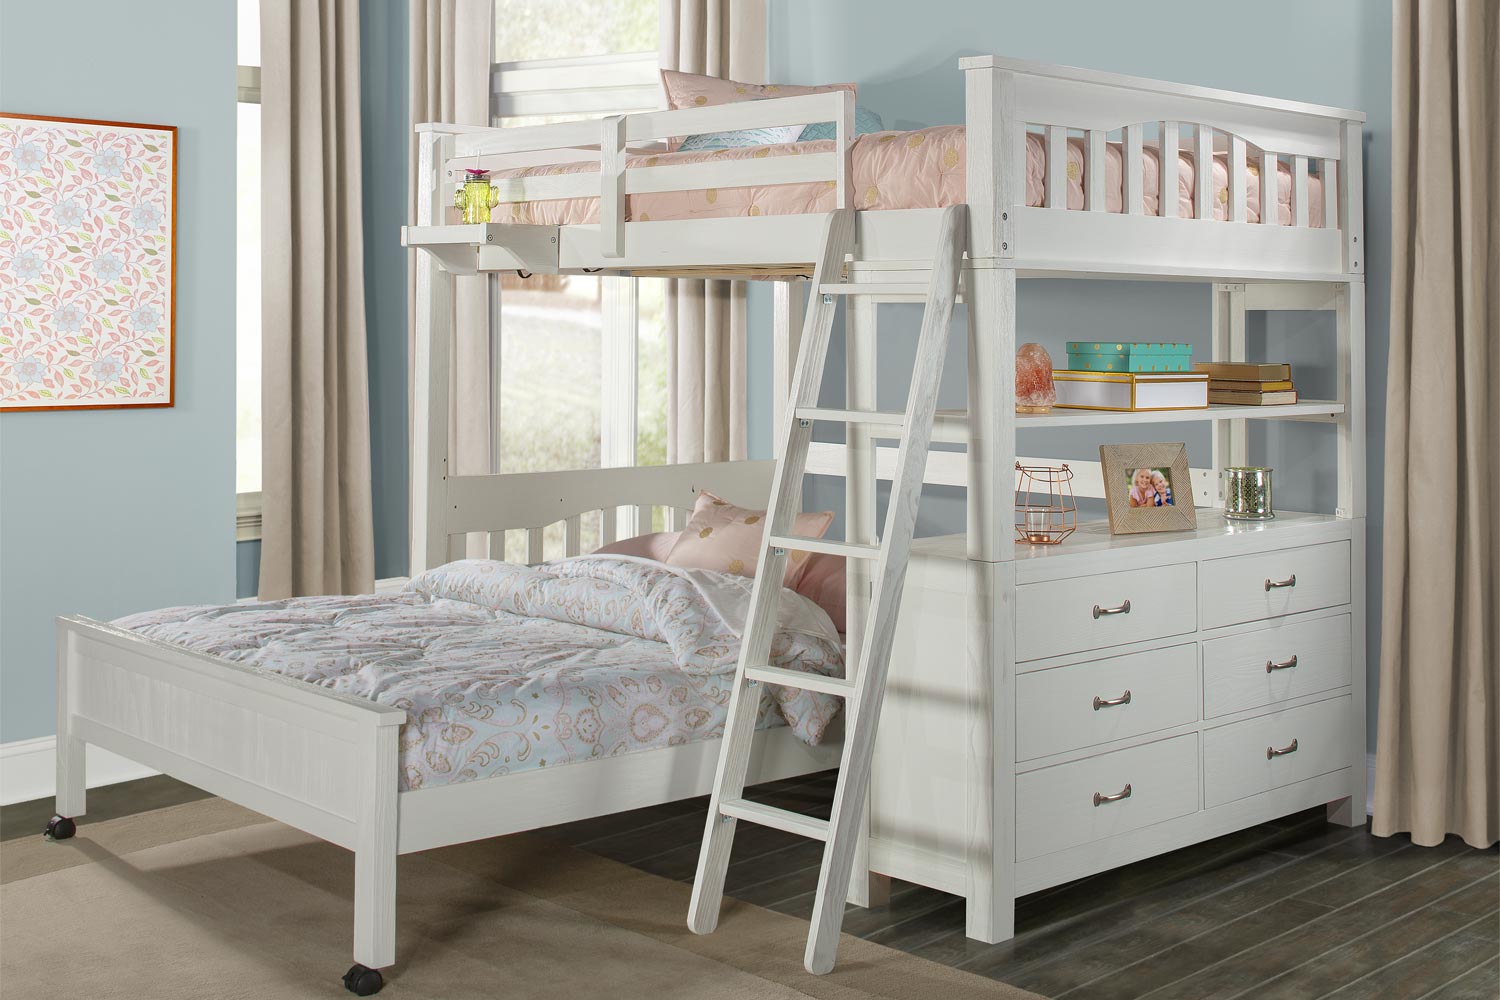 NE Kids Highlands Loft Bed with Full Lower Bed and Hanging Nightstand - White